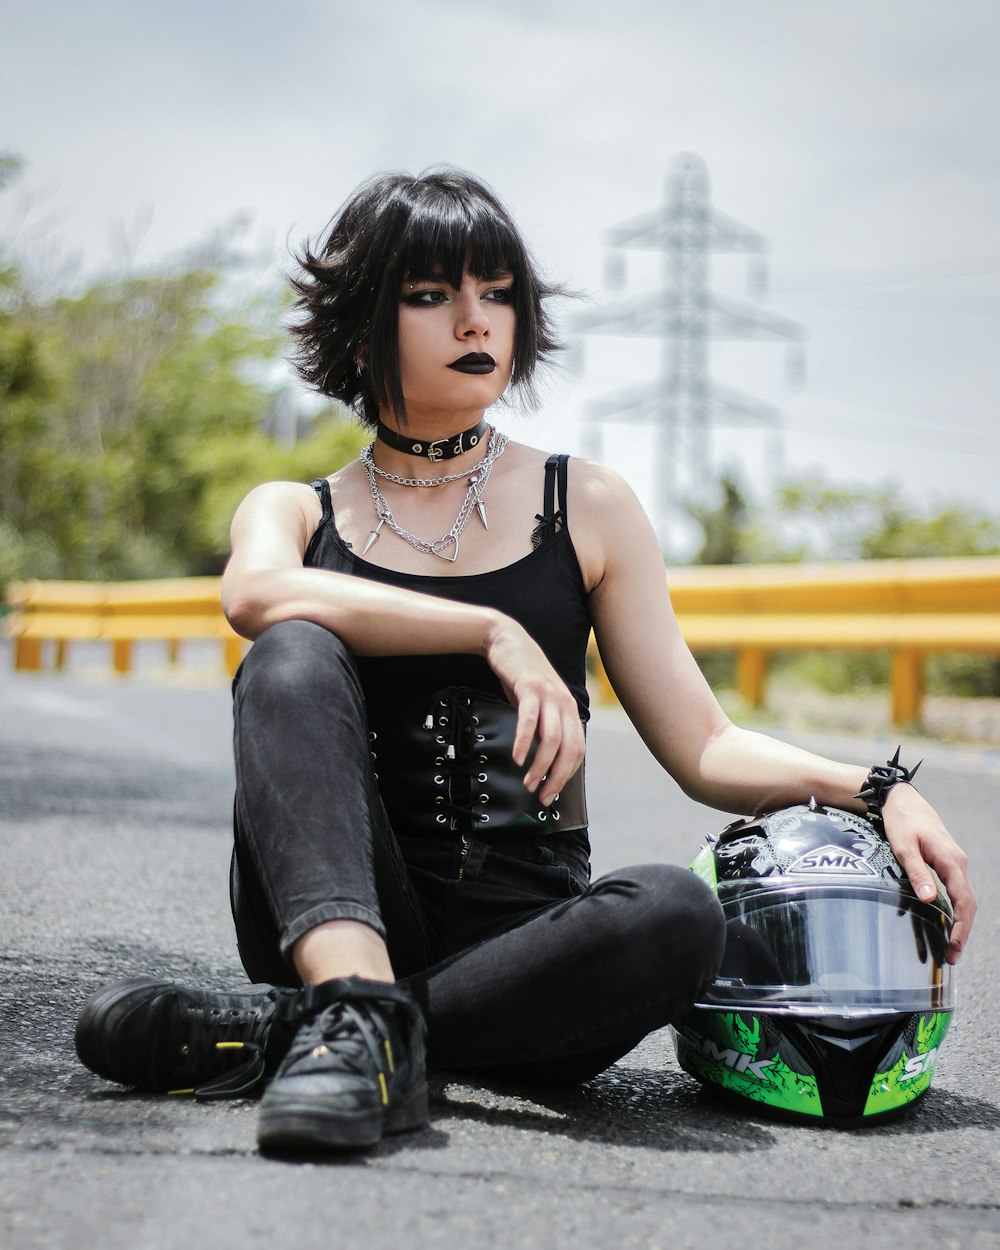 a woman sitting on the ground with a motorcycle helmet